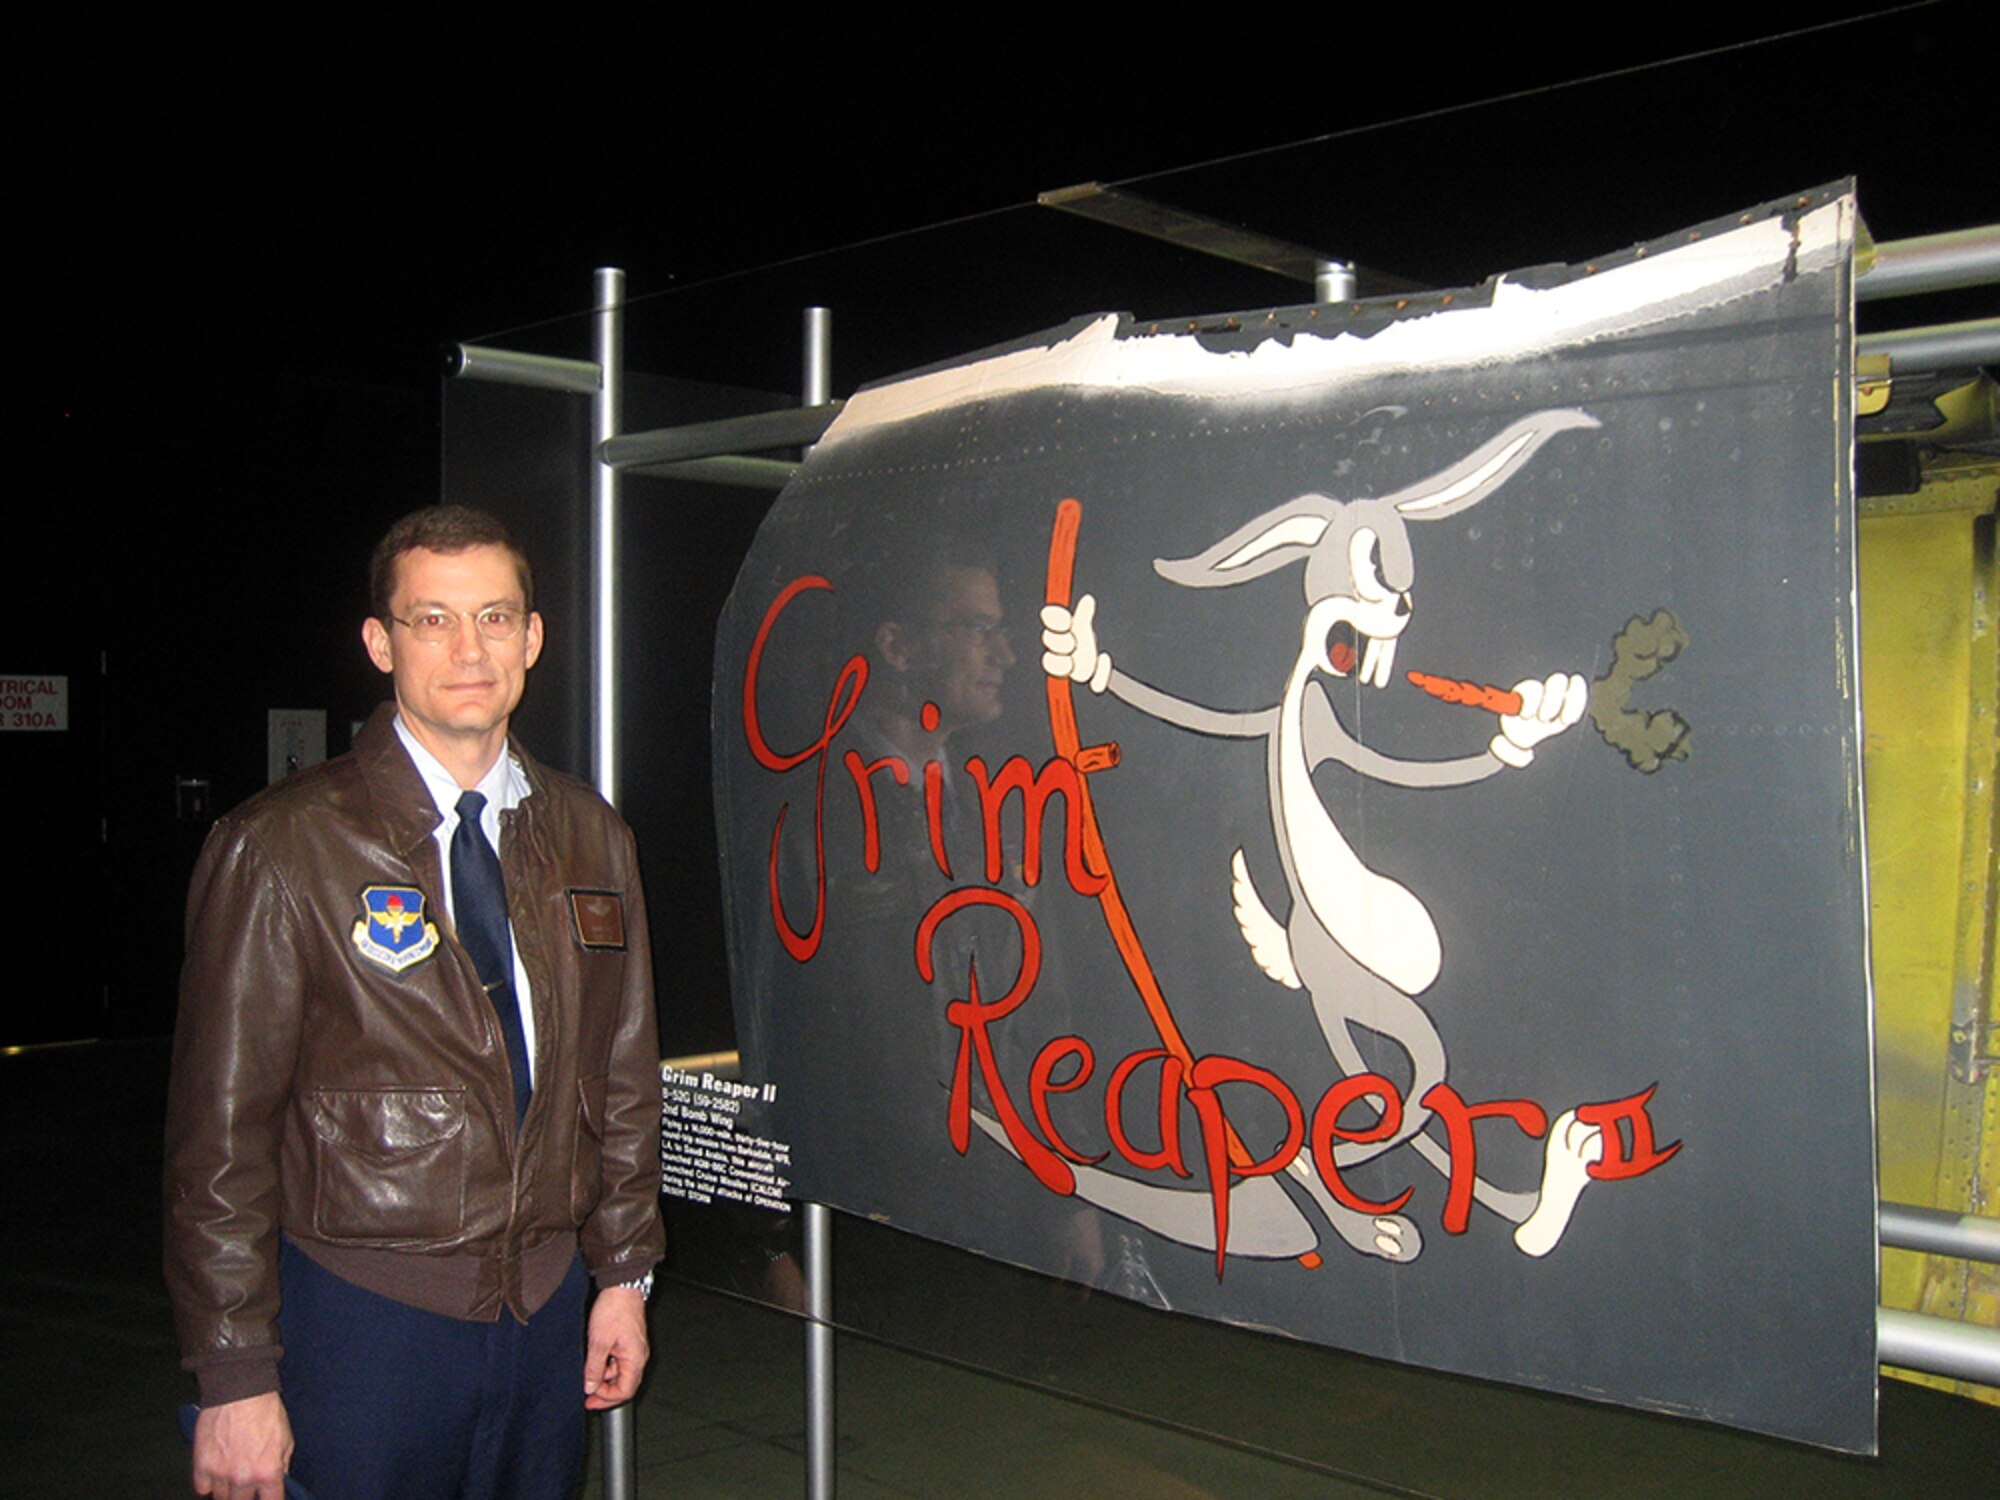 Warren Ward, deputy chief of programming division, Air Force Global Strike Command, stands next to the nose art on "Grim Reaper II," the B-52G he flew January 16, 1991, during Operation "Secret Squirrel." The aircraft was one of the seven strike aircraft used during the top secret mission. The original nose art was cut off and preserved, and is now on display at the National Museum of the United States Air Force at Wright-Patterson Air Force Base, Ohio. (Courtesy photo)